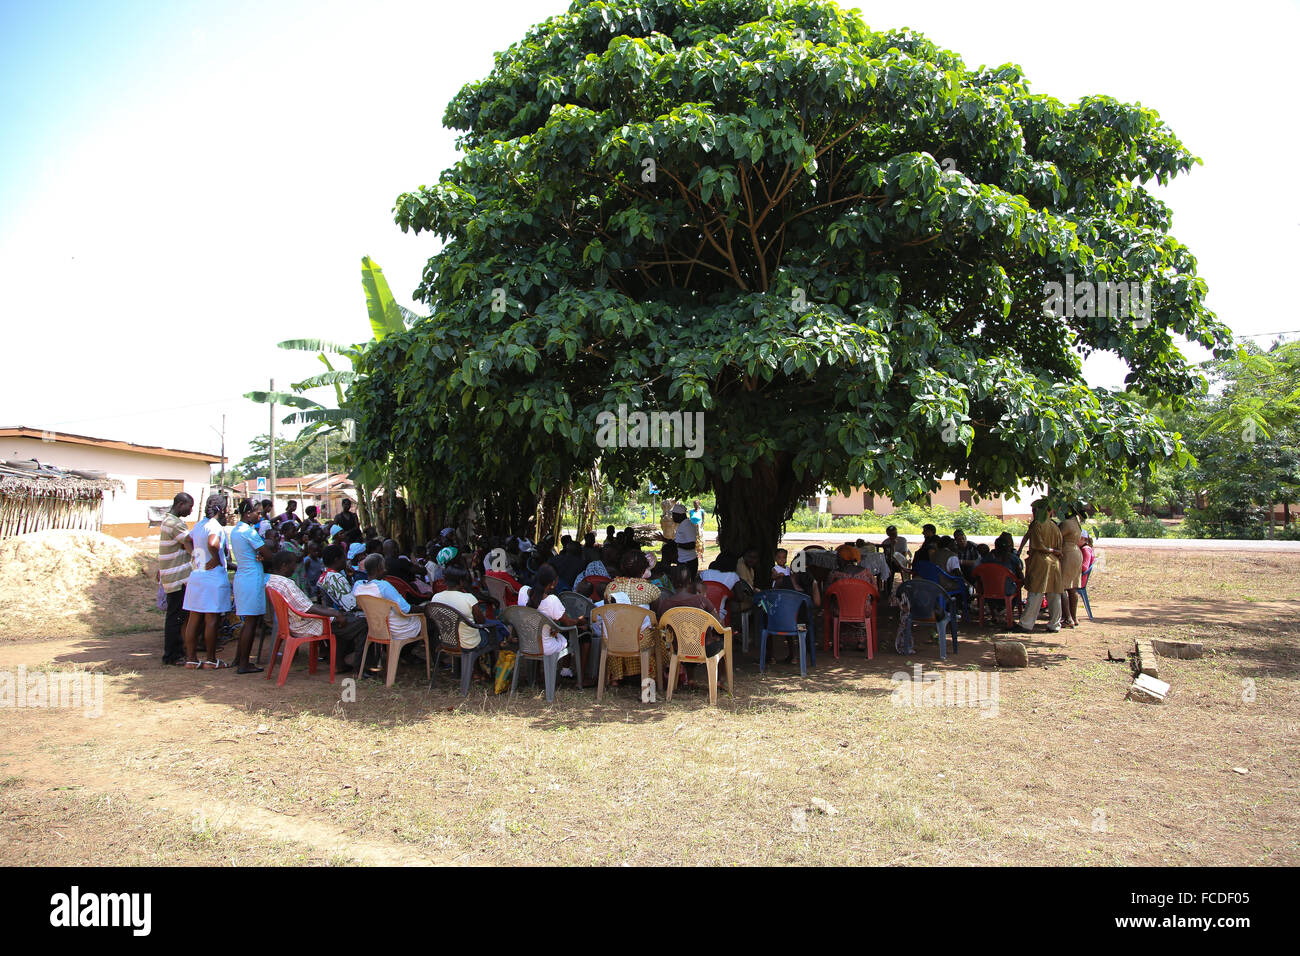 Group Of People Under A Tree Stock Photo Alamy